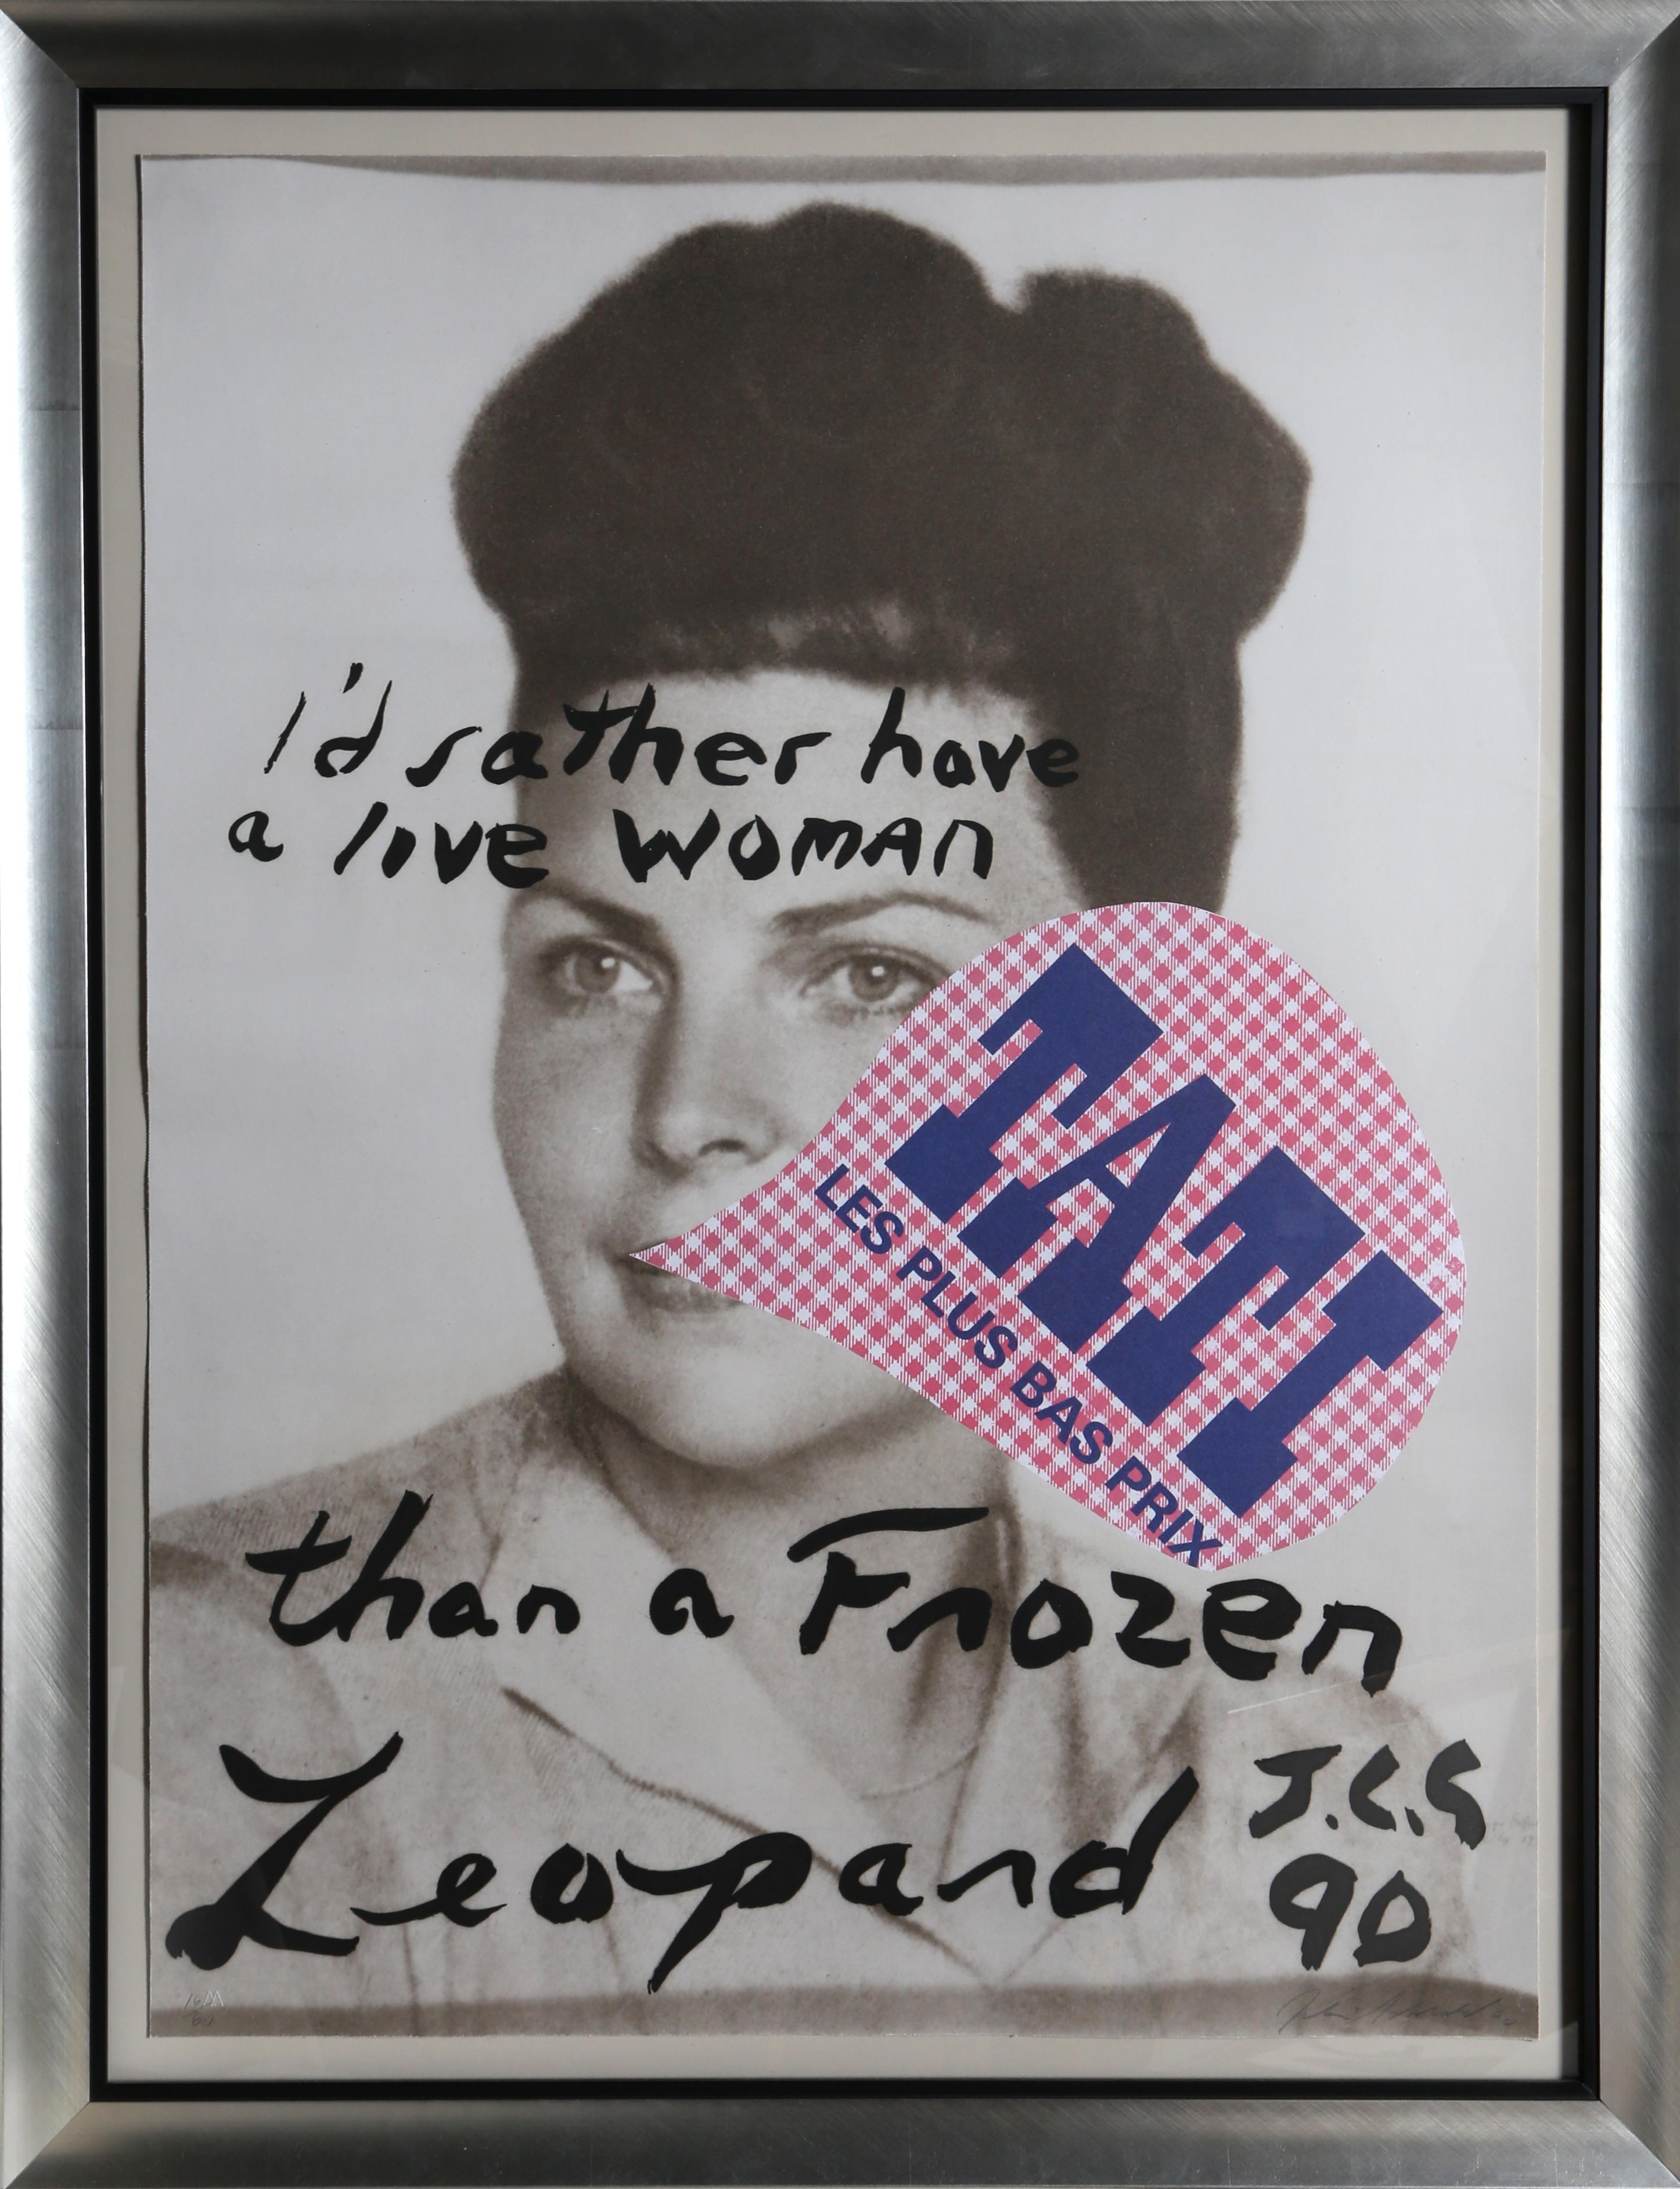 I’d Rather Have a Live Woman than a Frozen Leopard by Julian Schnabel, American (1951)
Date: 1990
Screenprint, signed and numbered in pencil
Edition of 16/60
Size: 35.5 x 28.5 in. (90.17 x 72.39 cm)
Frame Size: 41 x 32 inches
Publisher: Paris Review
